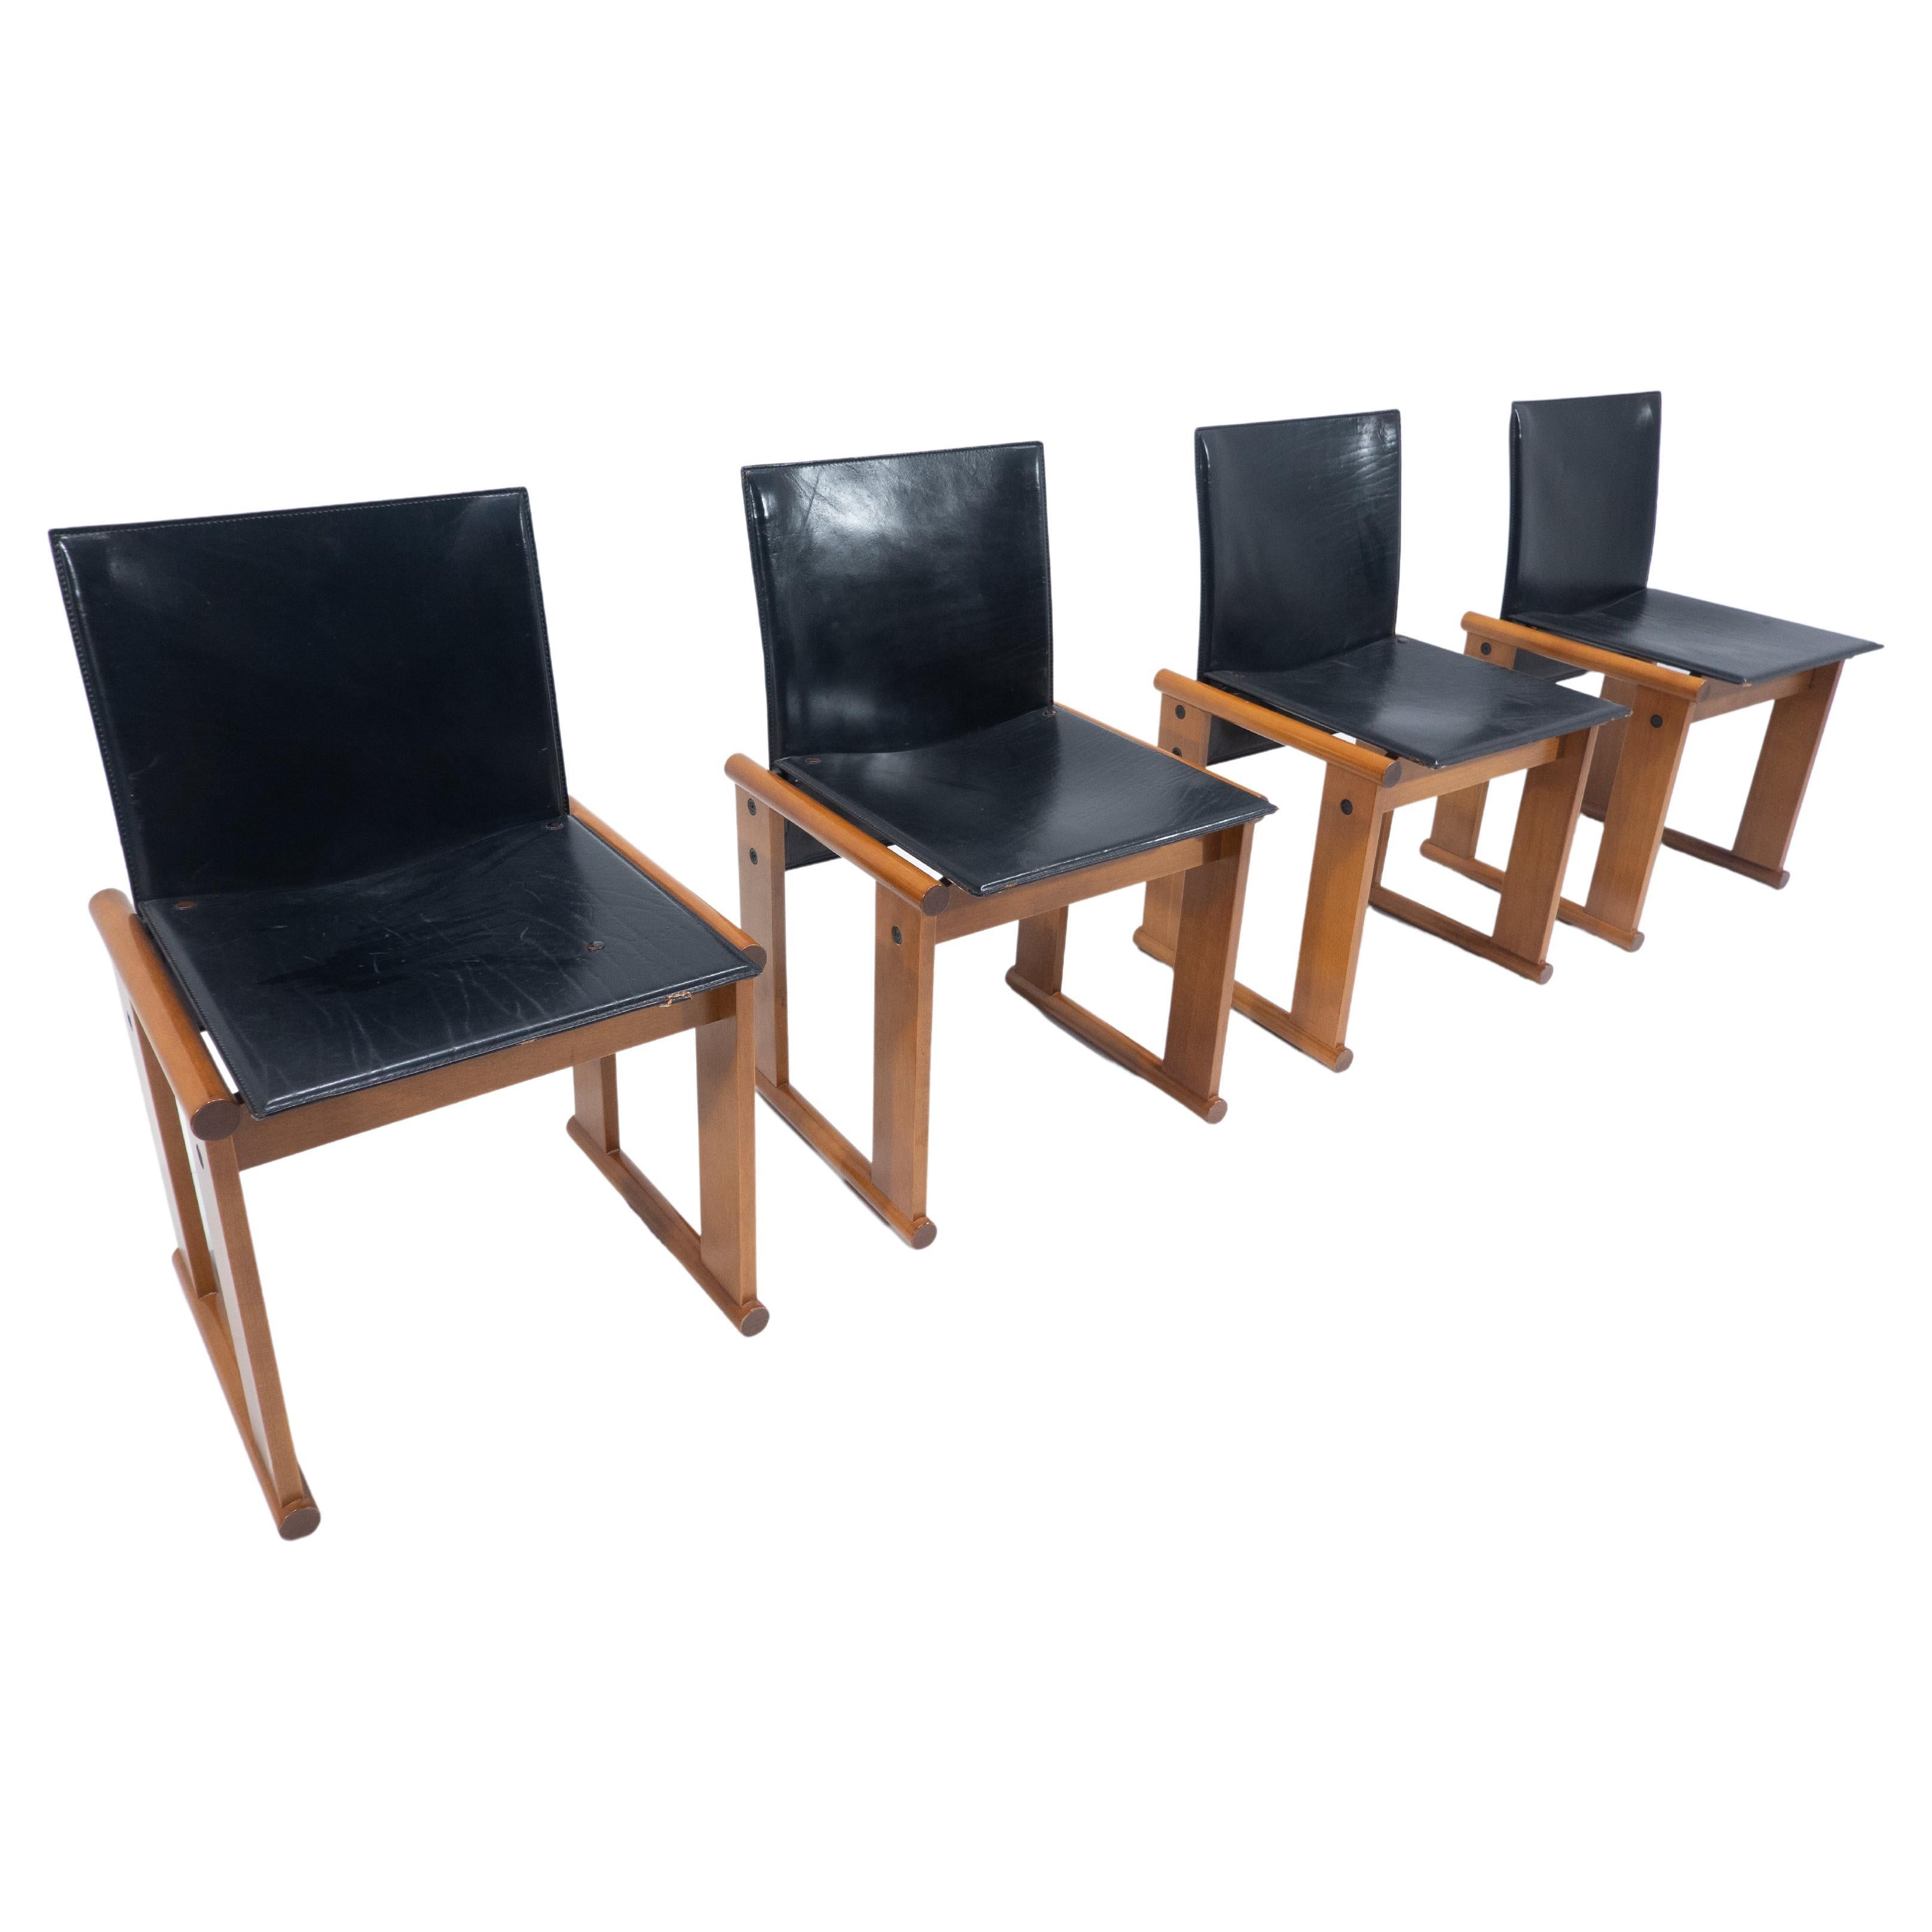 Mid-Century Modern Set of 4 Chairs by Afra and Tobia Scarpa, Italy, 1960s